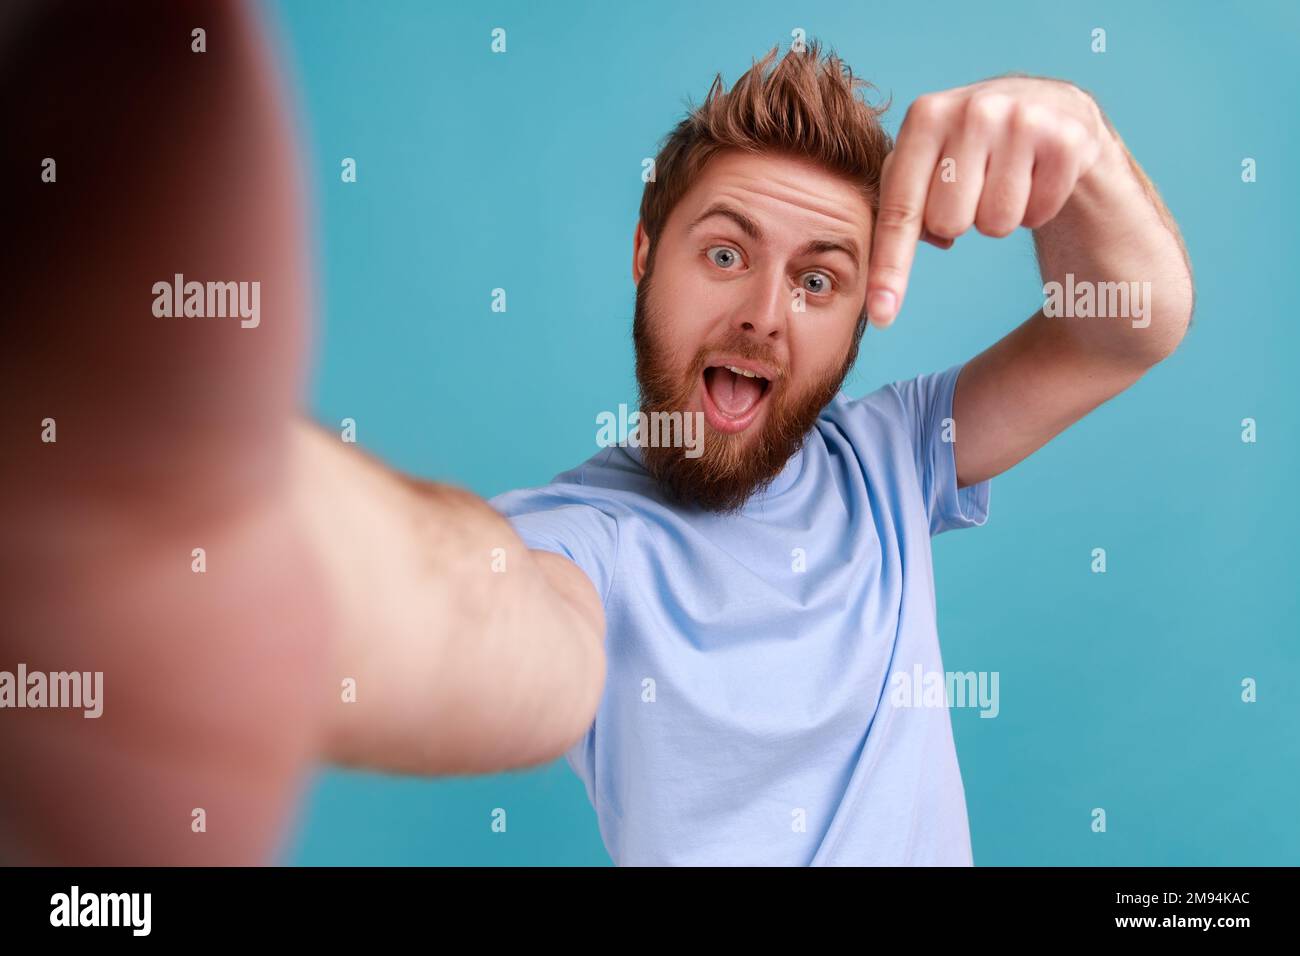 Portrait of bearded man taking selfie or making video call, looking at camera POV, point of view of photo, pointing finger down, subscribe. Indoor studio shot isolated on blue background. Stock Photo